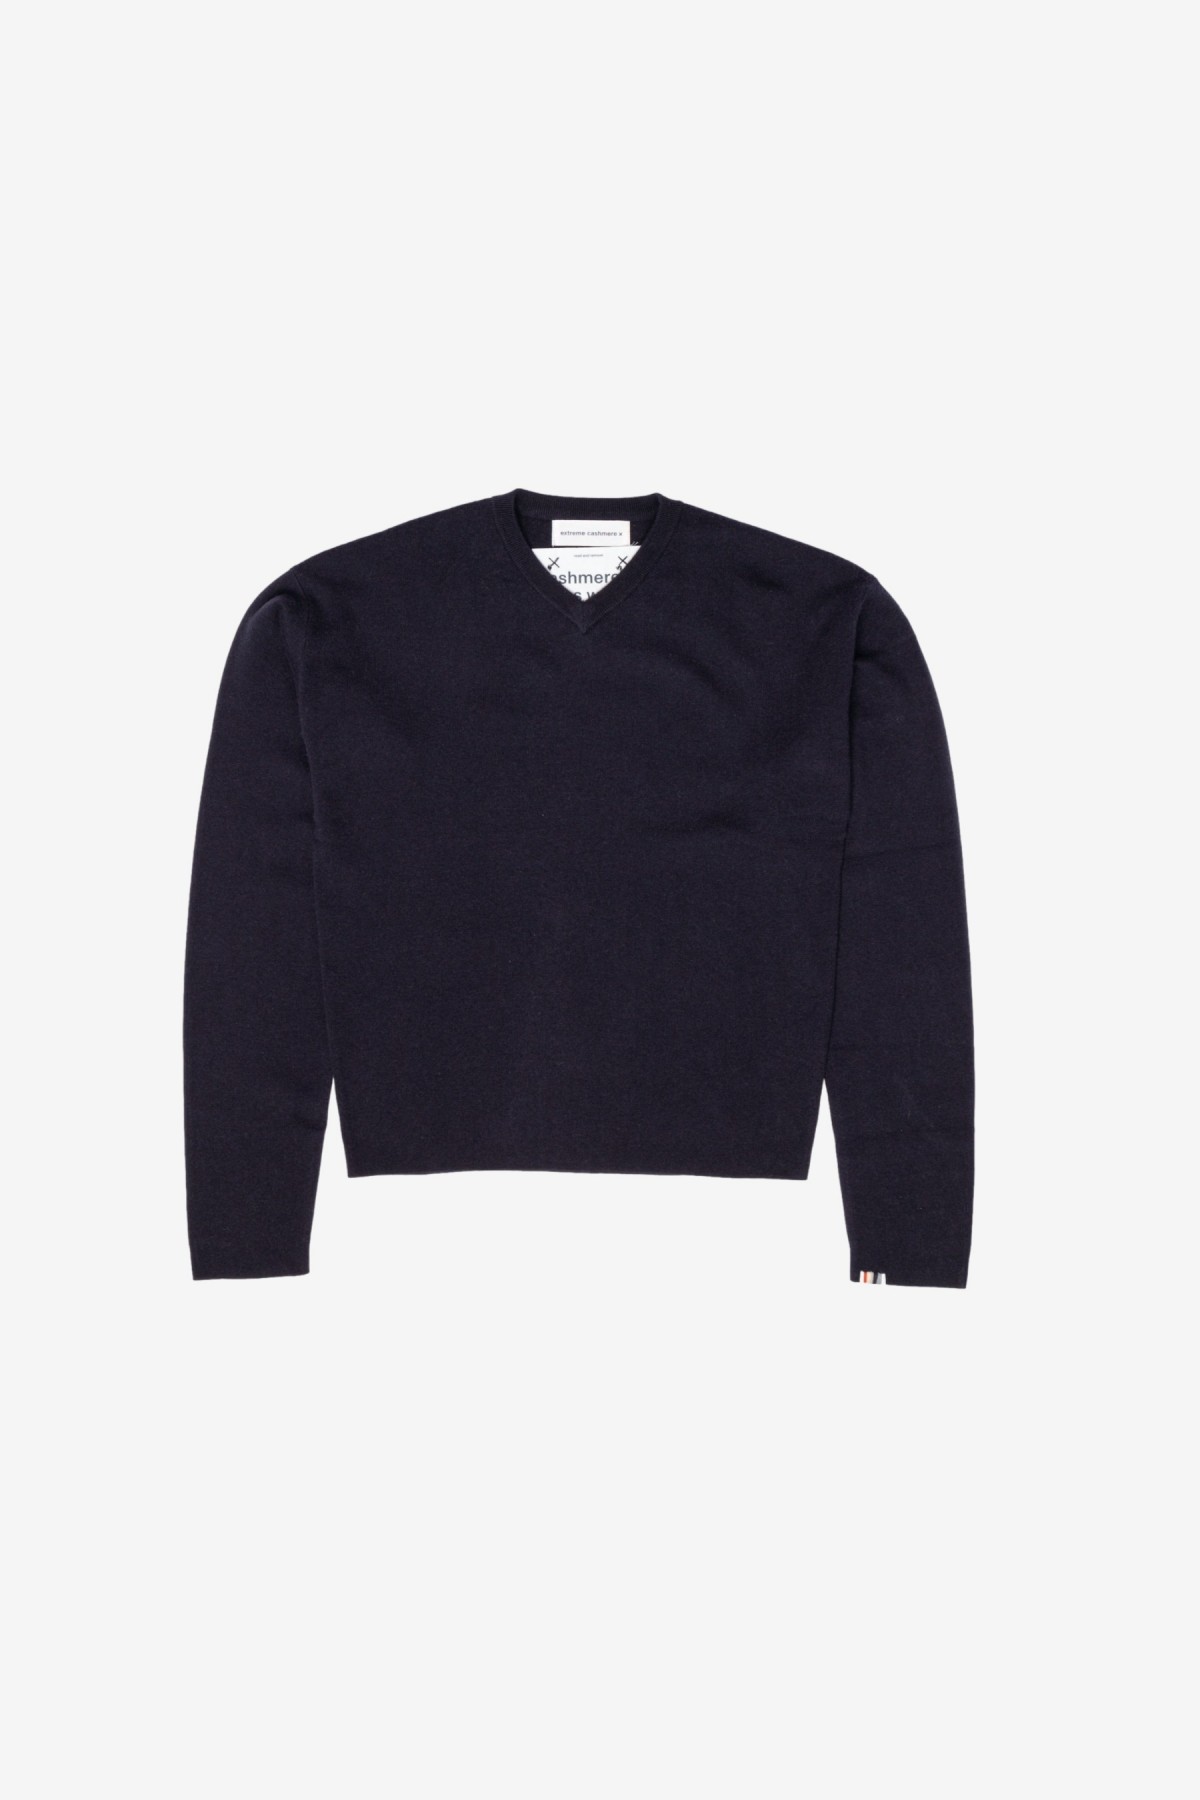 extreme cashmere n°336 ninety in Navy